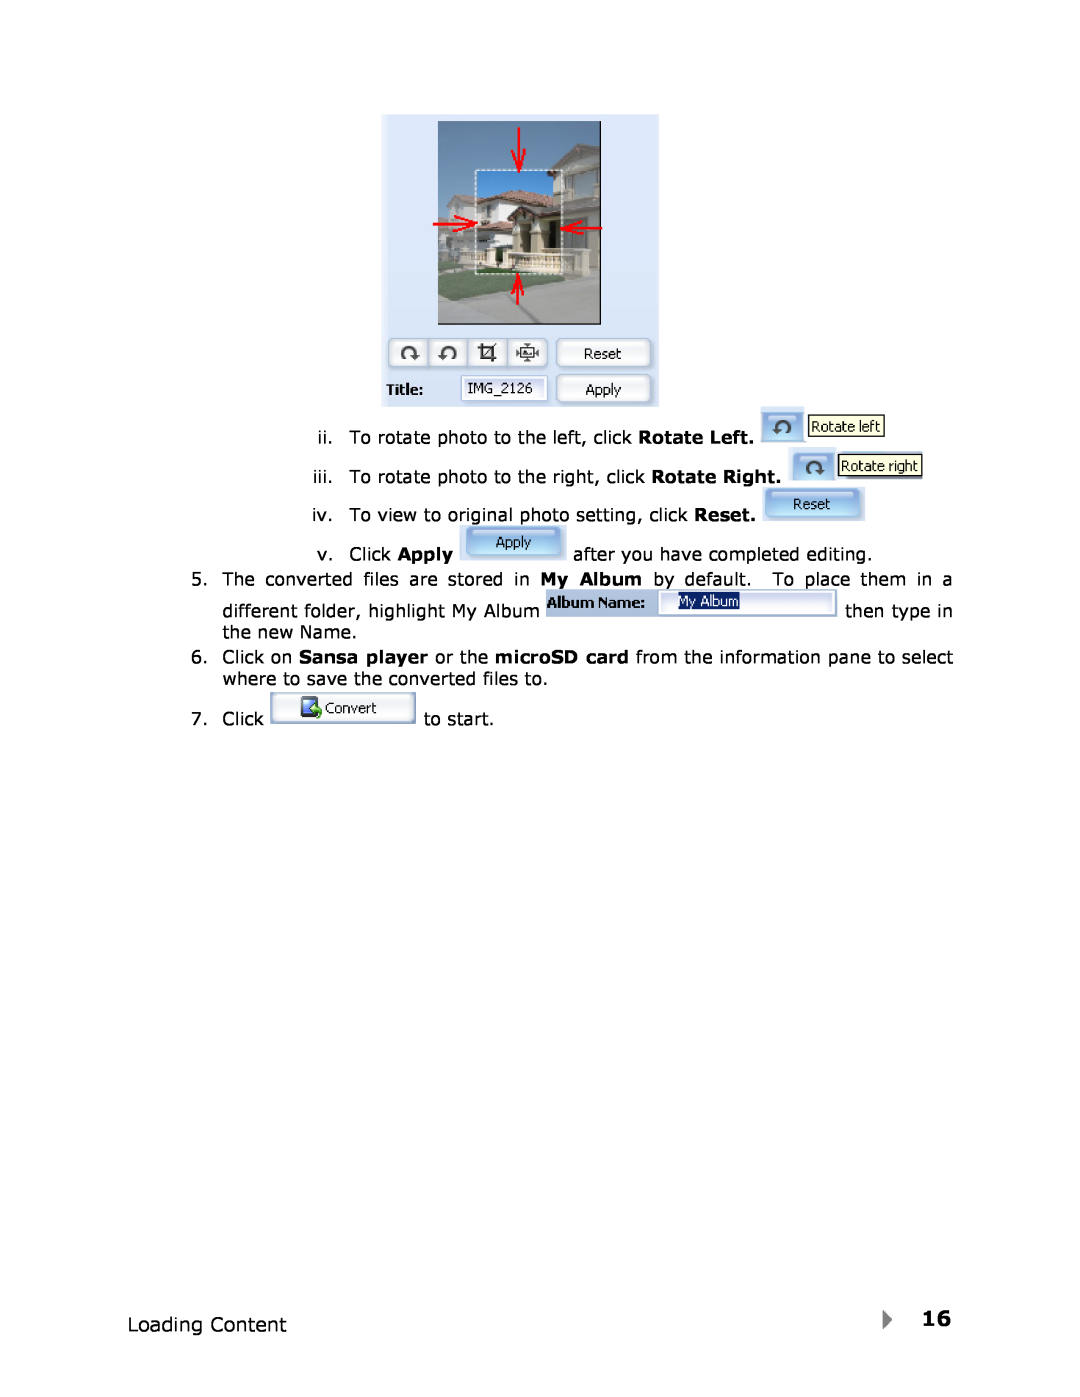 SanDisk View user manual ii. To rotate photo to the left, click Rotate Left 